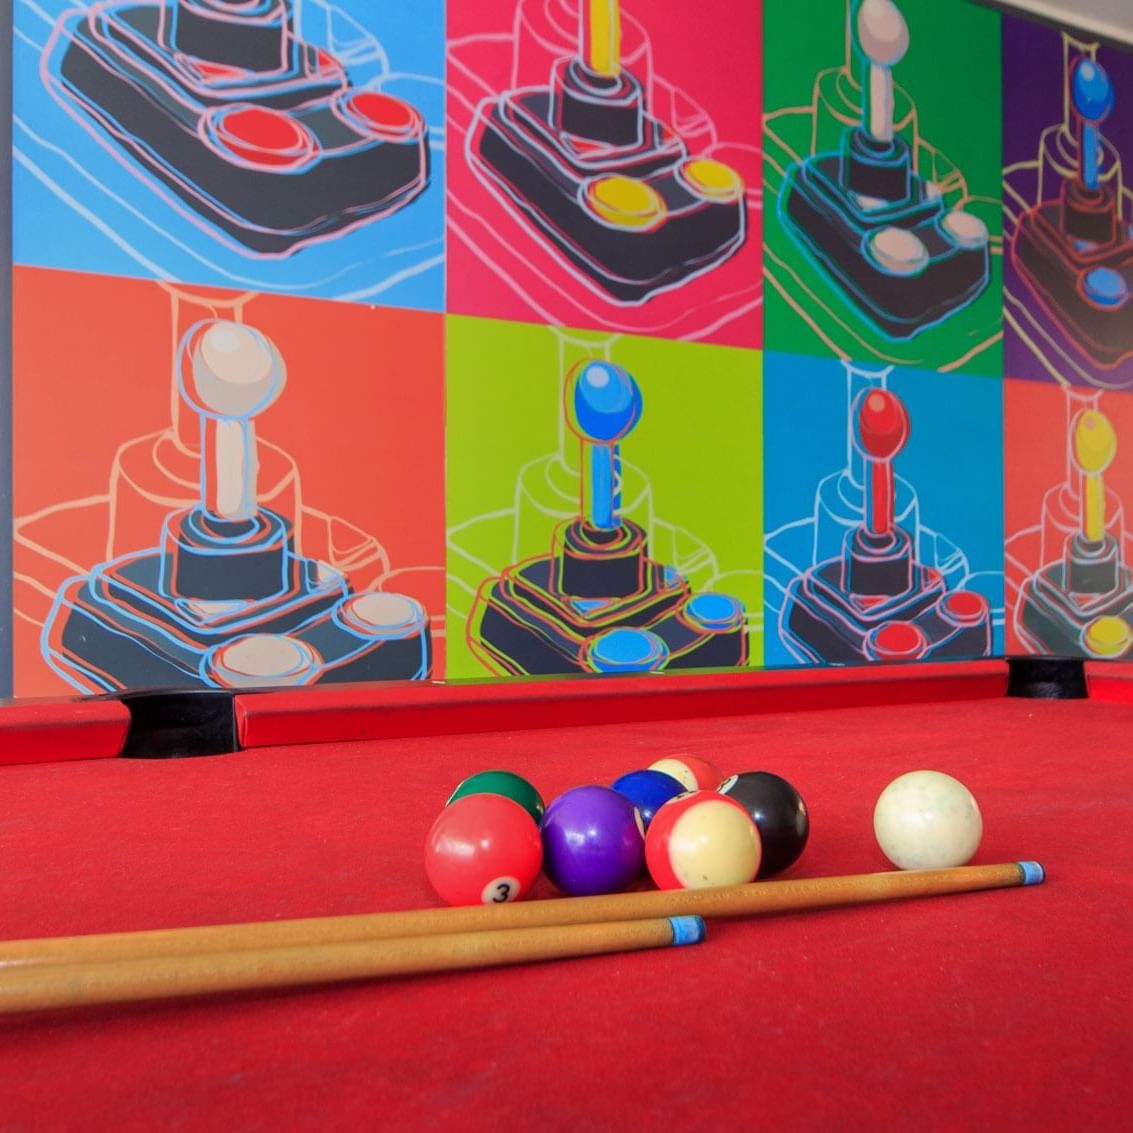 Closeup of the Pool table and cue sticks at Pop Art Tocanicipa